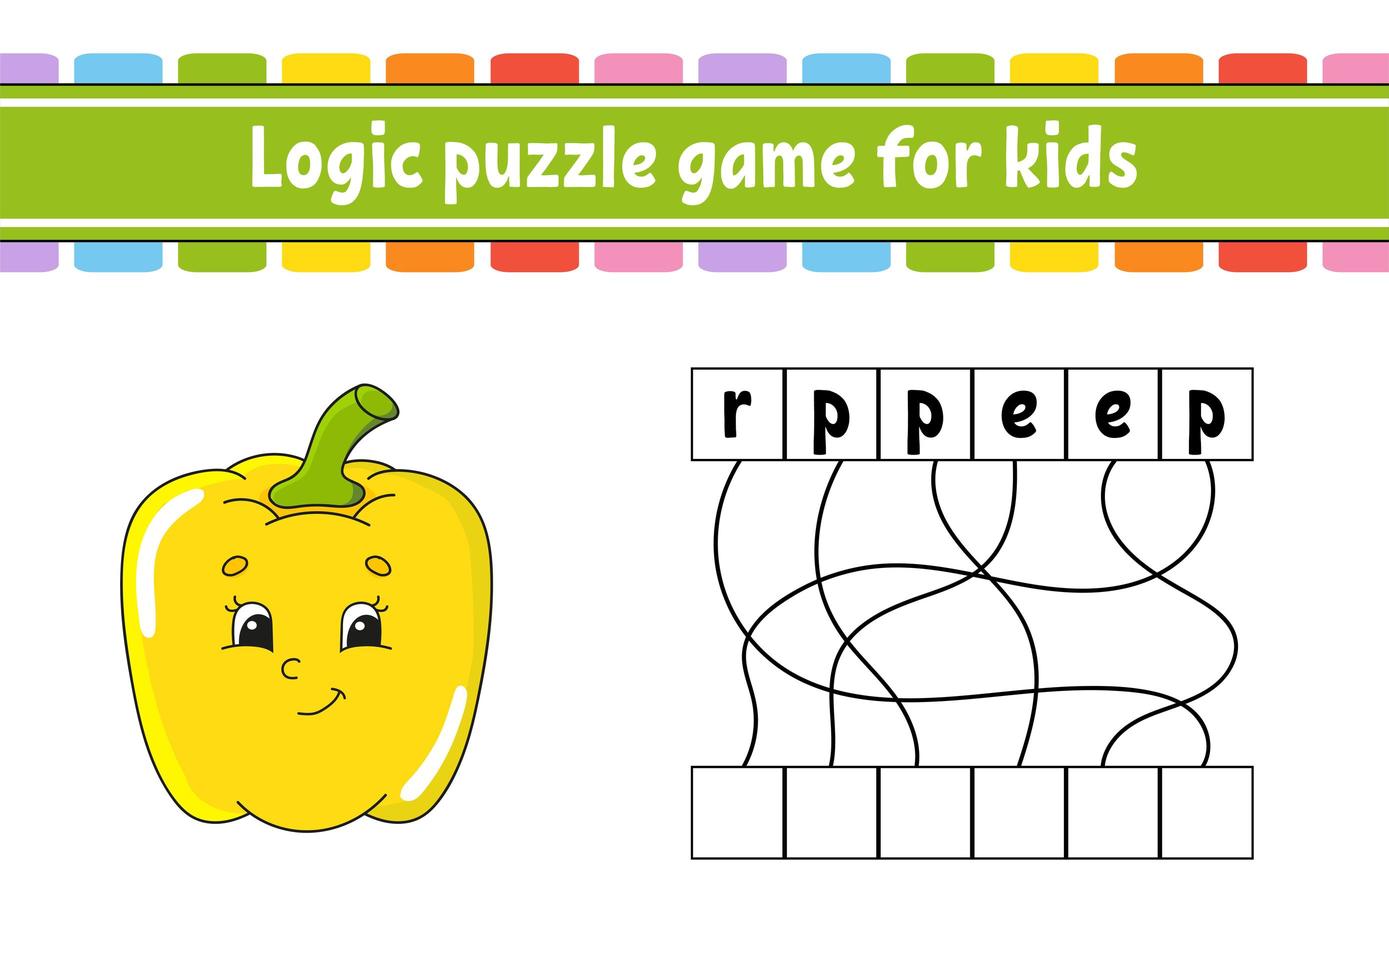 Logic puzzle game. Learning words for kids. Vegetable pepper. Find the hidden name. Worksheet, Activity page. English game. Isolated vector illustration. Cartoon character.